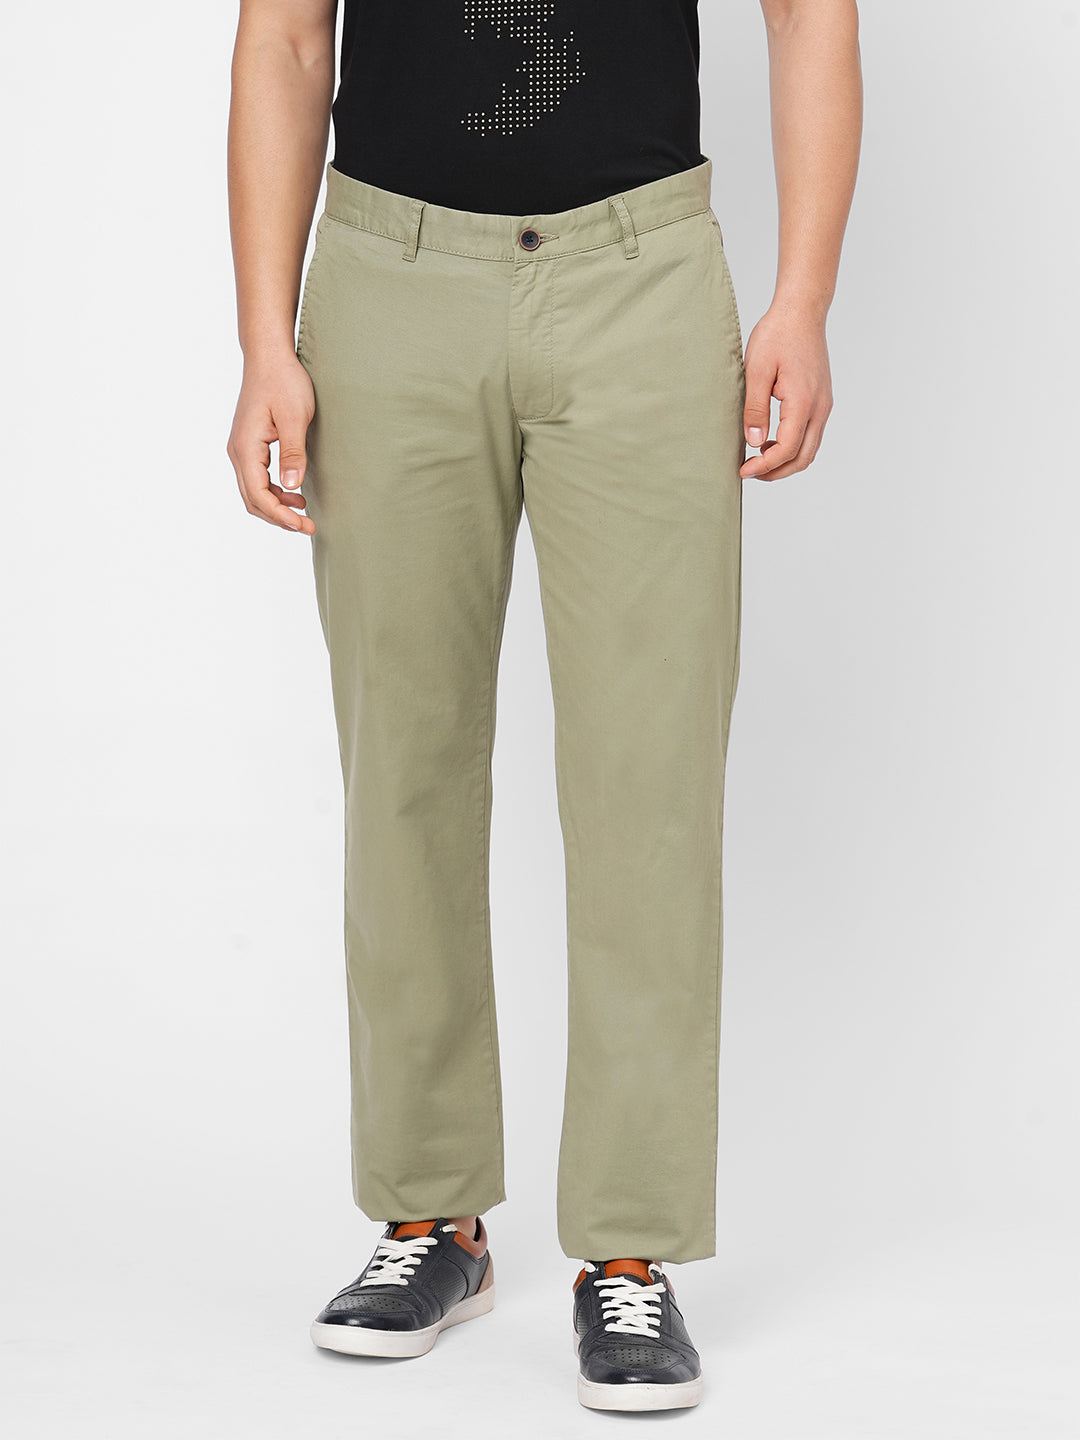 Buy Grey Solid Straight-Fit Cotton Pant Online in India -Beyoung